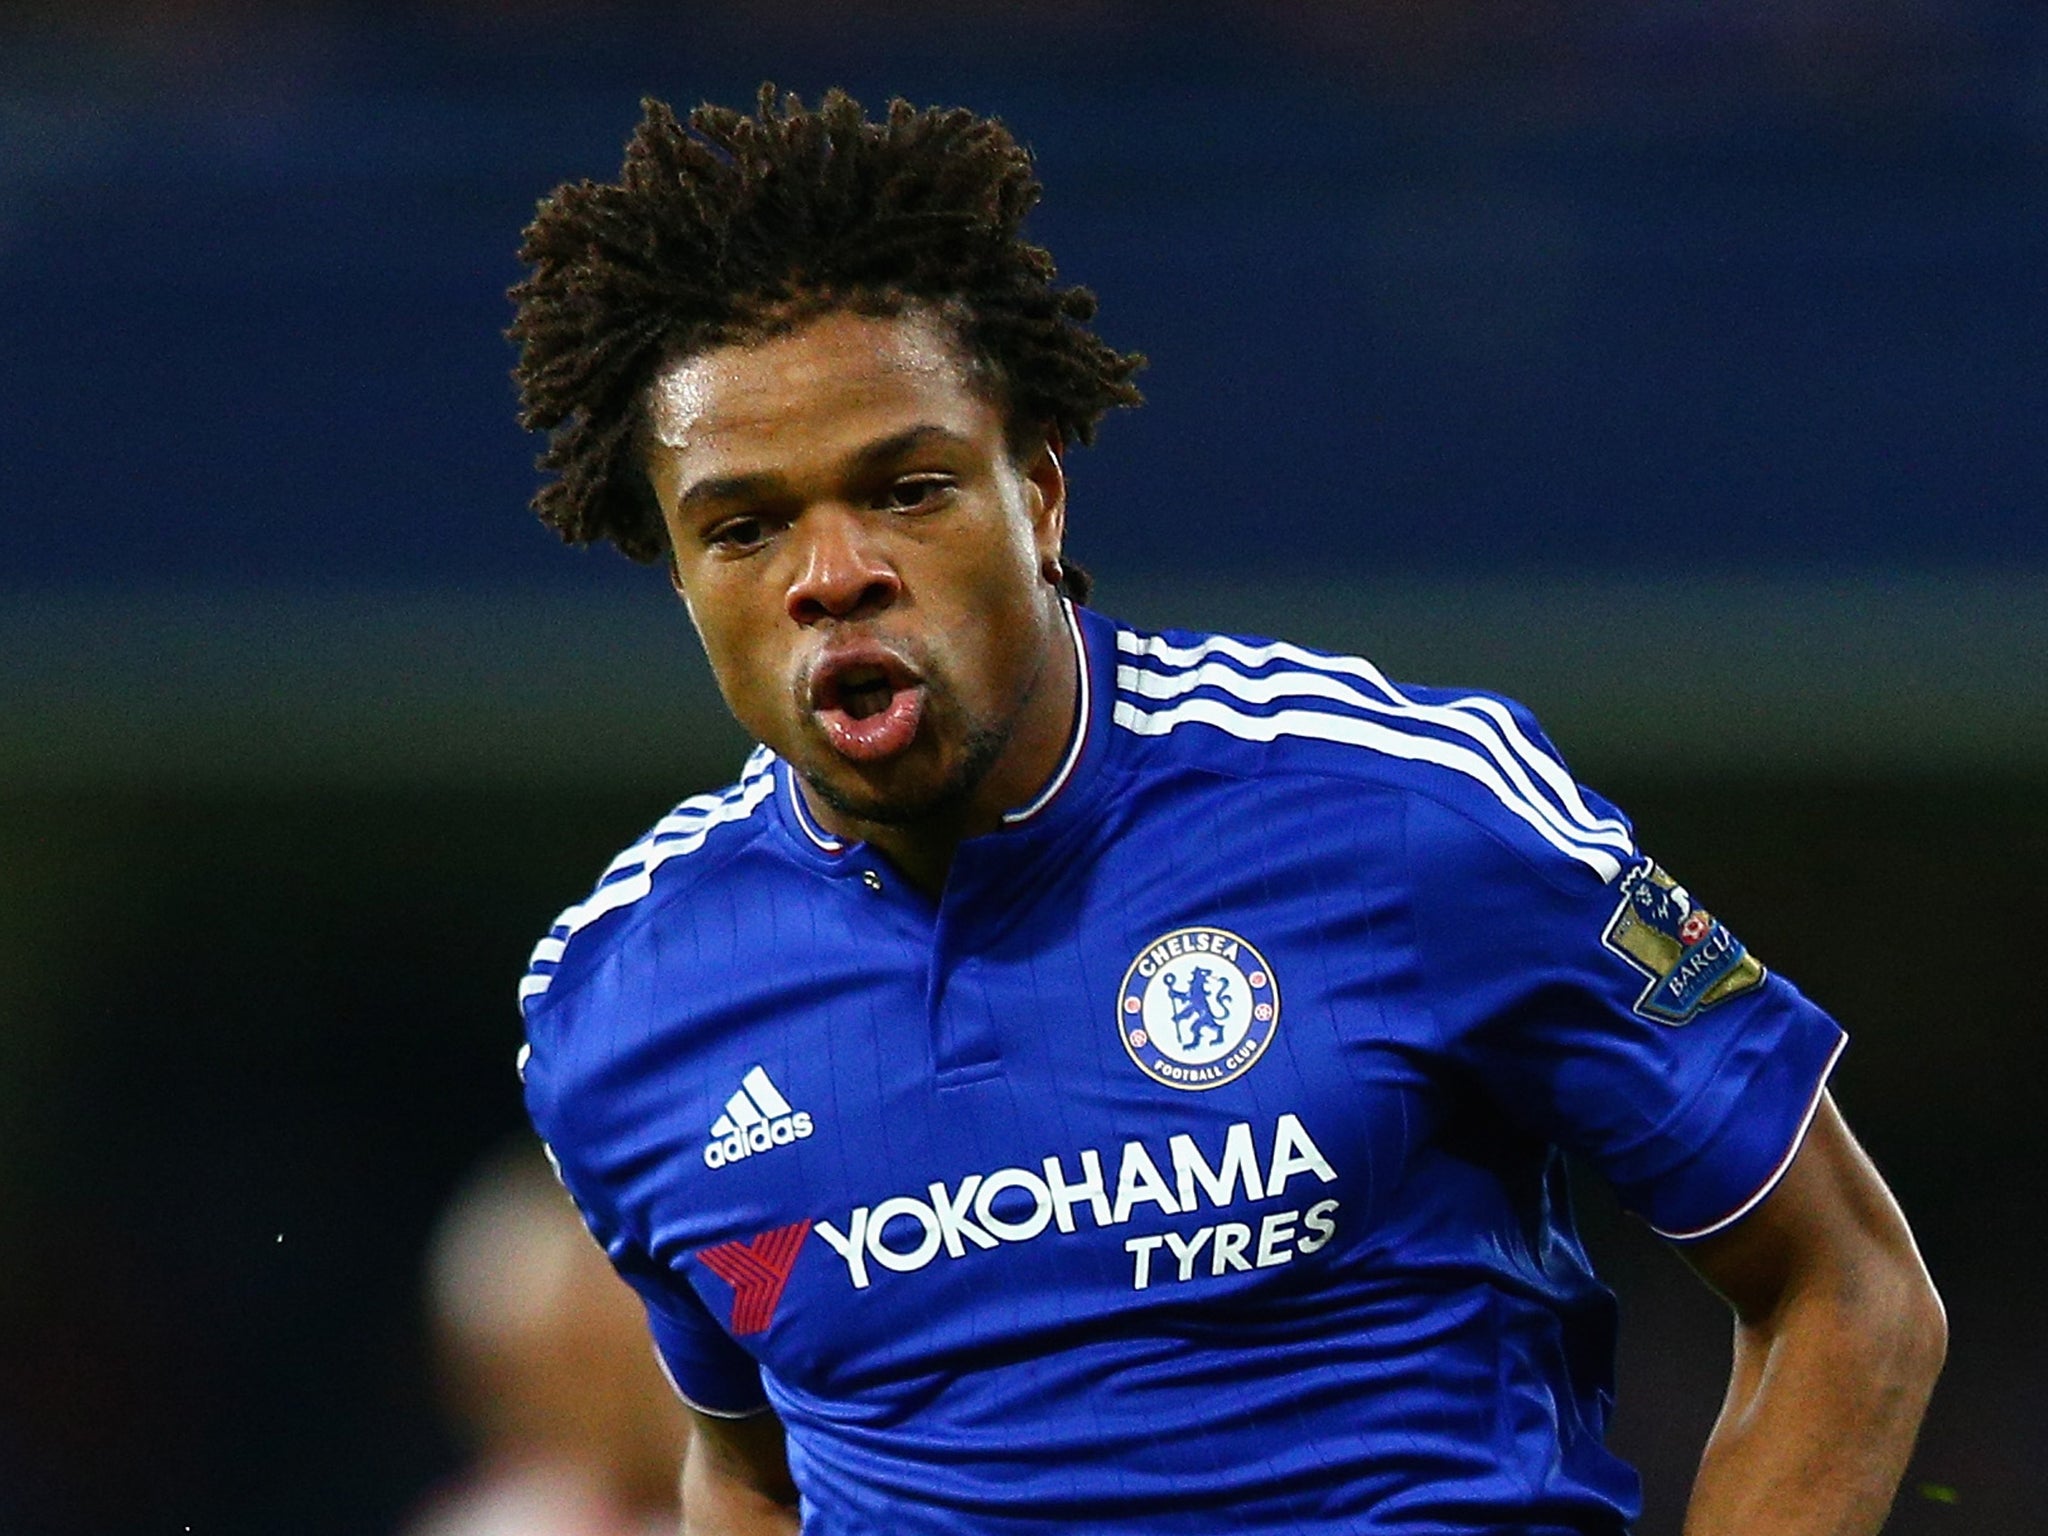 Loic Remy came on, ahead of Pato, against Stoke City